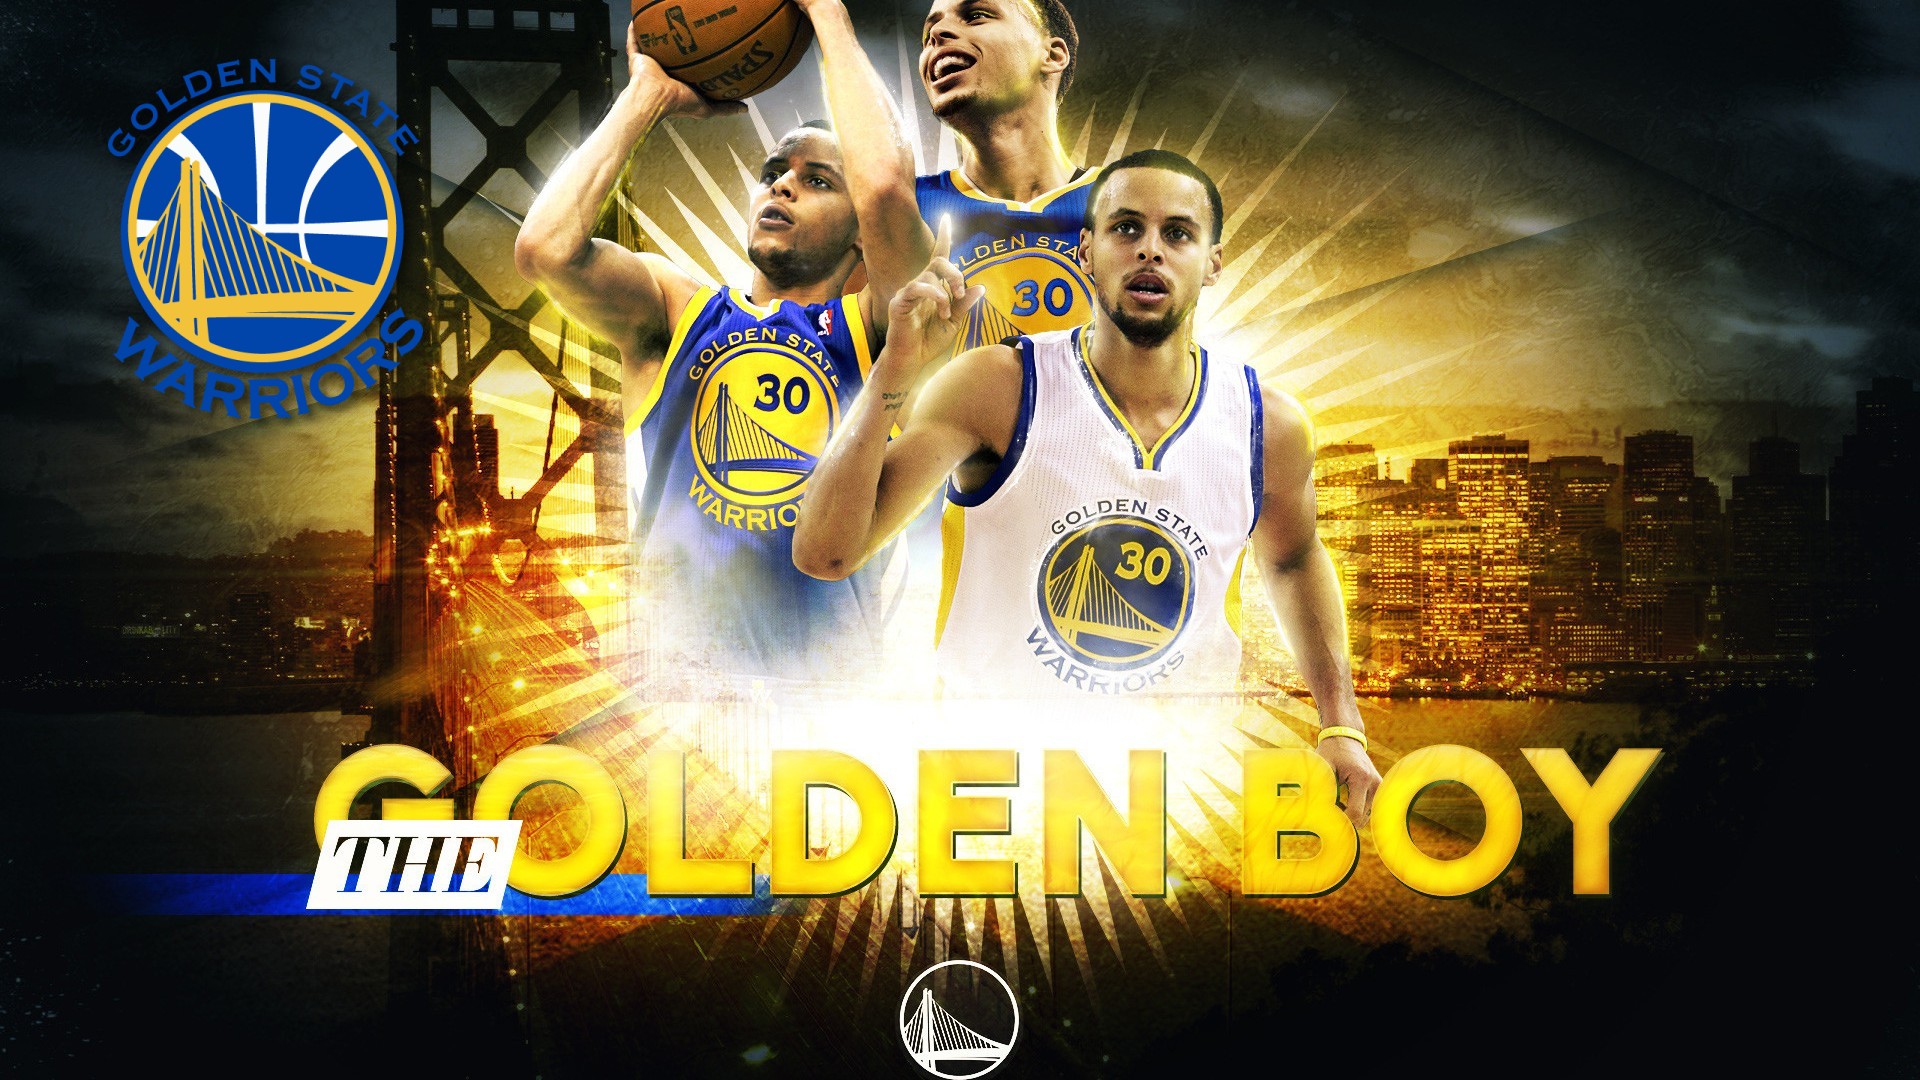 Backgrounds Stephen Curry HD with image dimensions 1920x1080 pixel. You can make this wallpaper for your Desktop Computer Backgrounds, Windows or Mac Screensavers, iPhone Lock screen, Tablet or Android and another Mobile Phone device